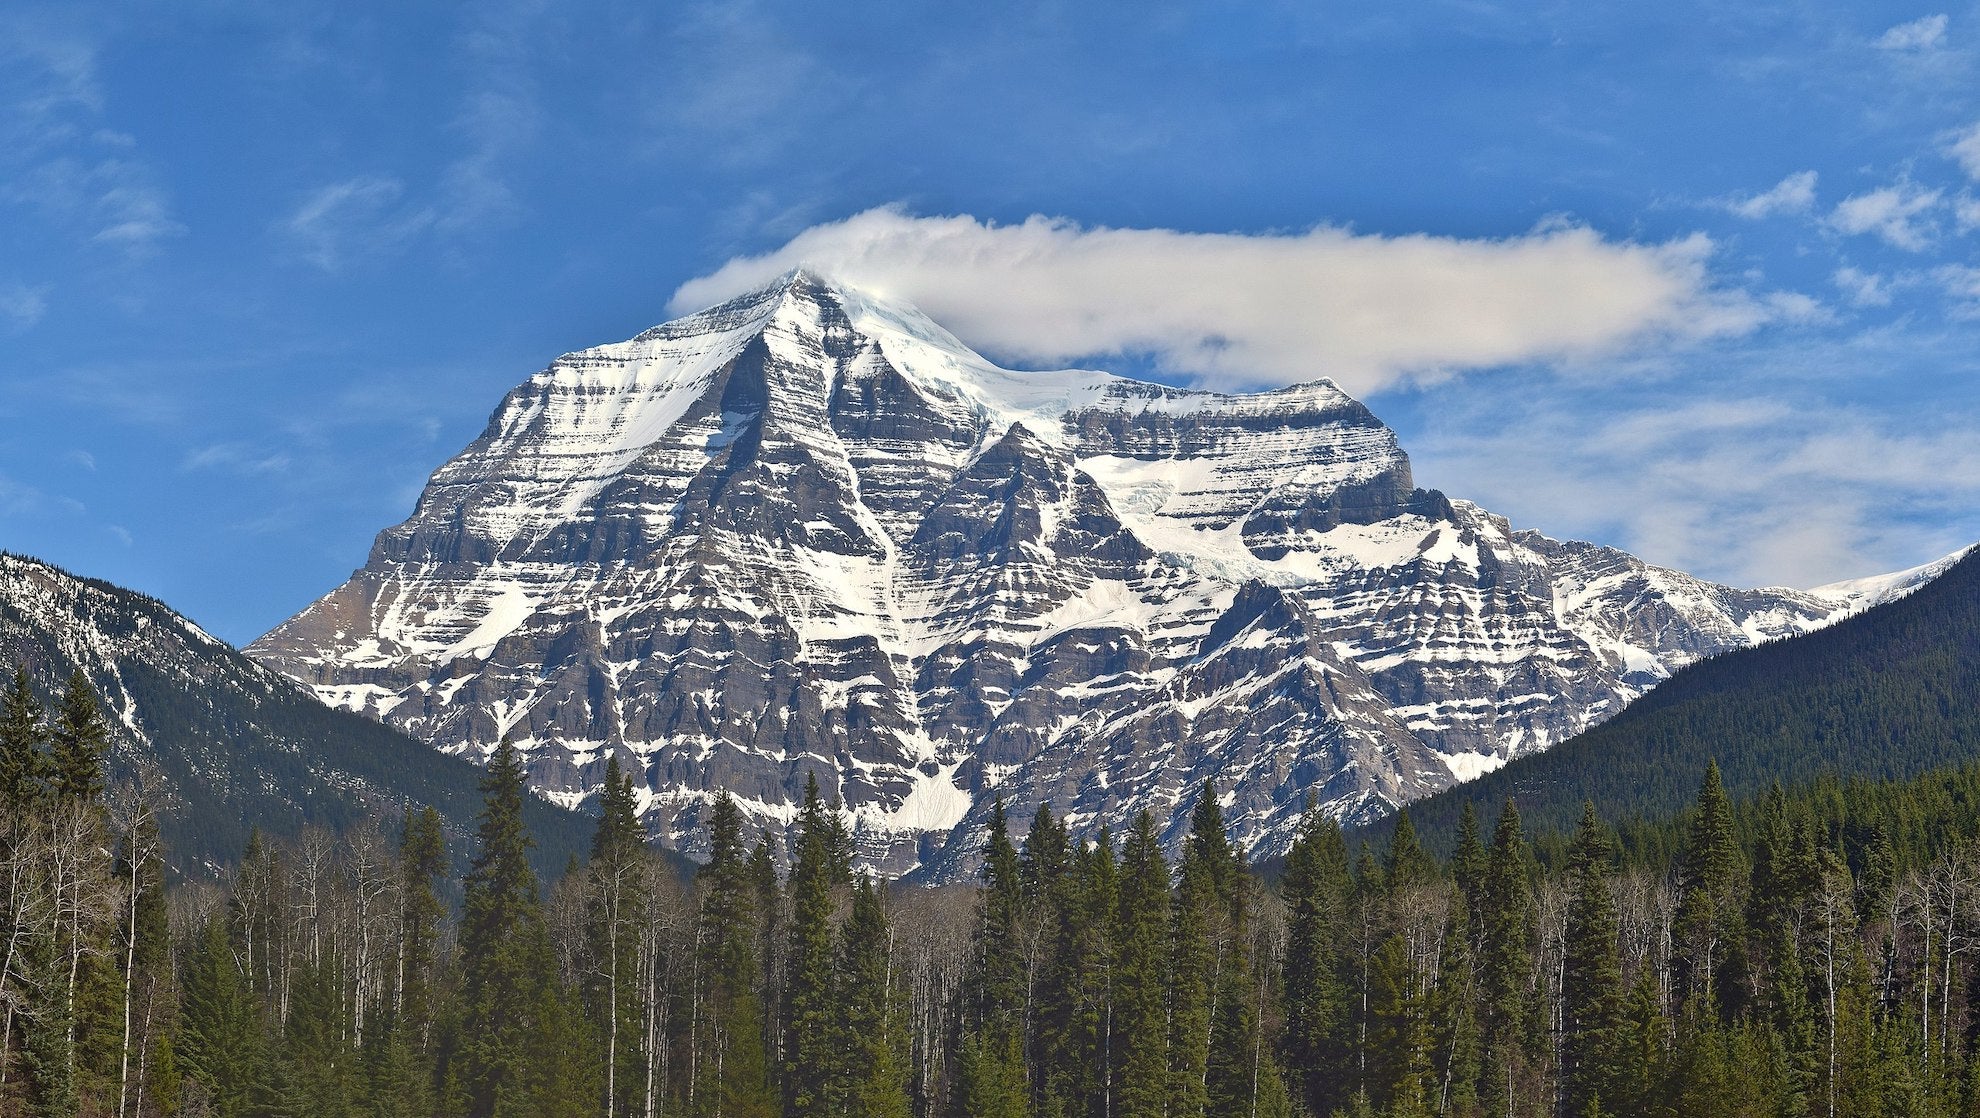 Mount Robson in Canadian Rockies is a sight for adventure riders